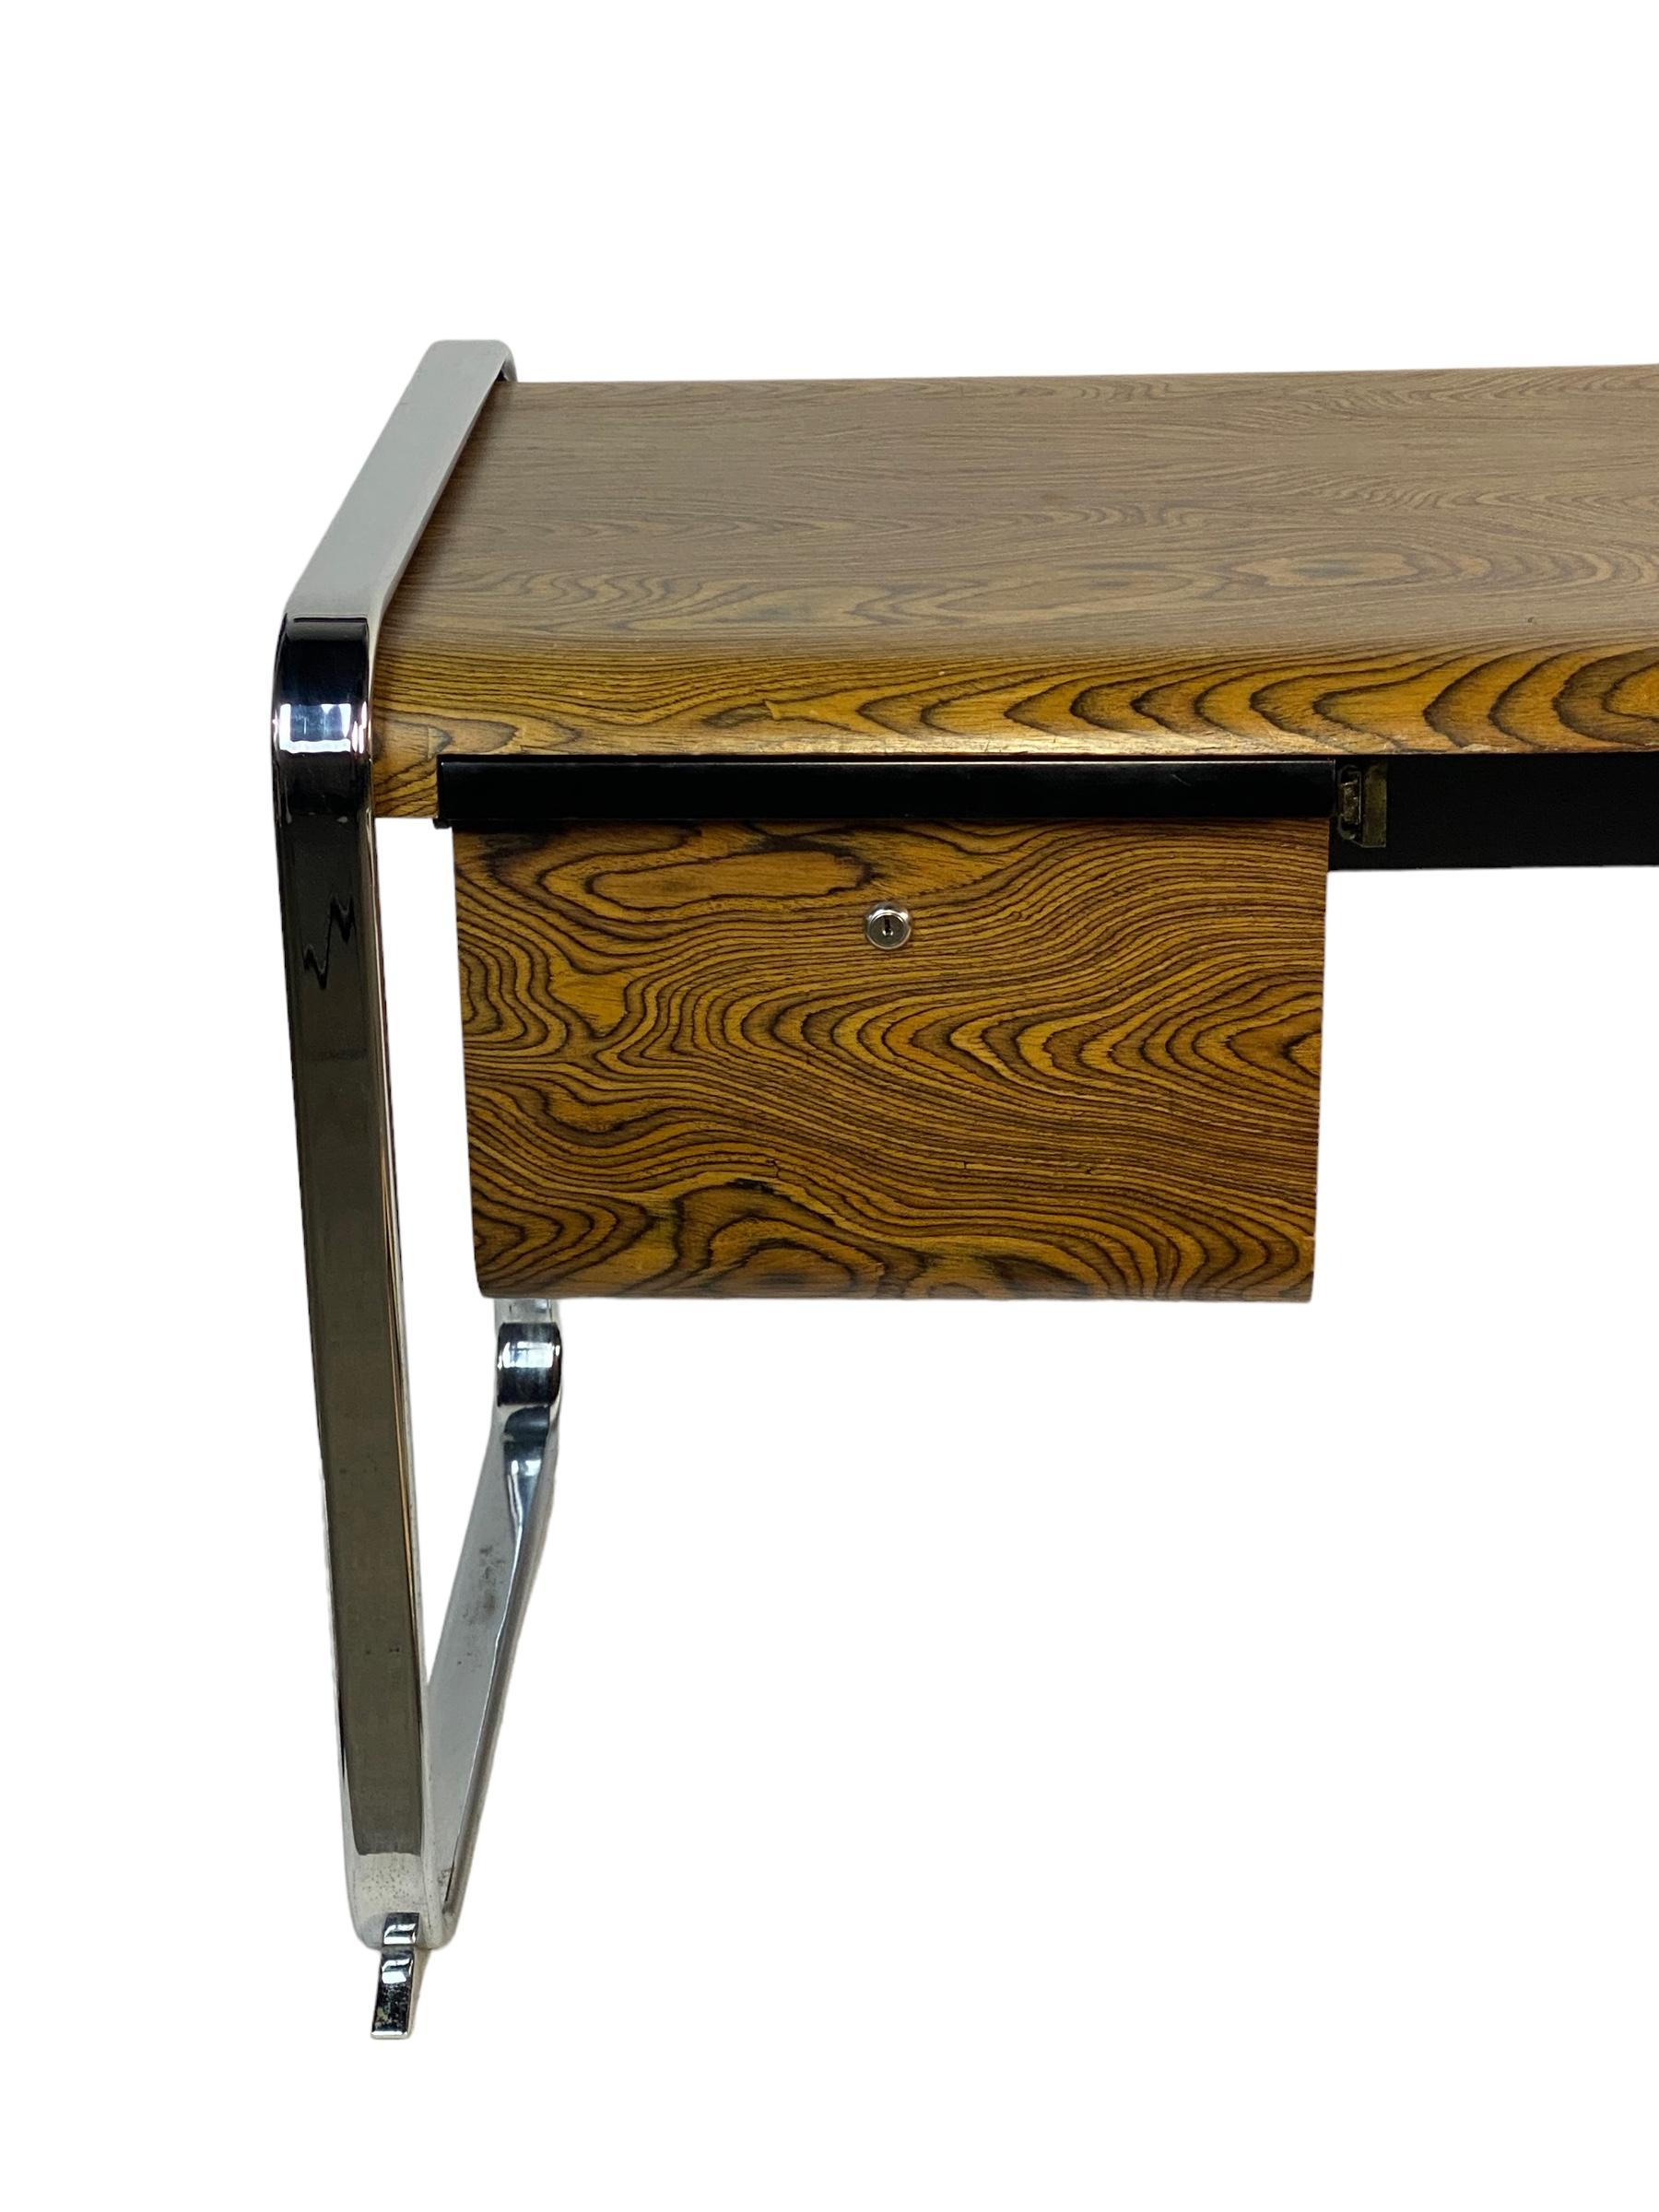 North American Herman Miller Zebra Wood and Chrome Desk Designed by Peter Protzman